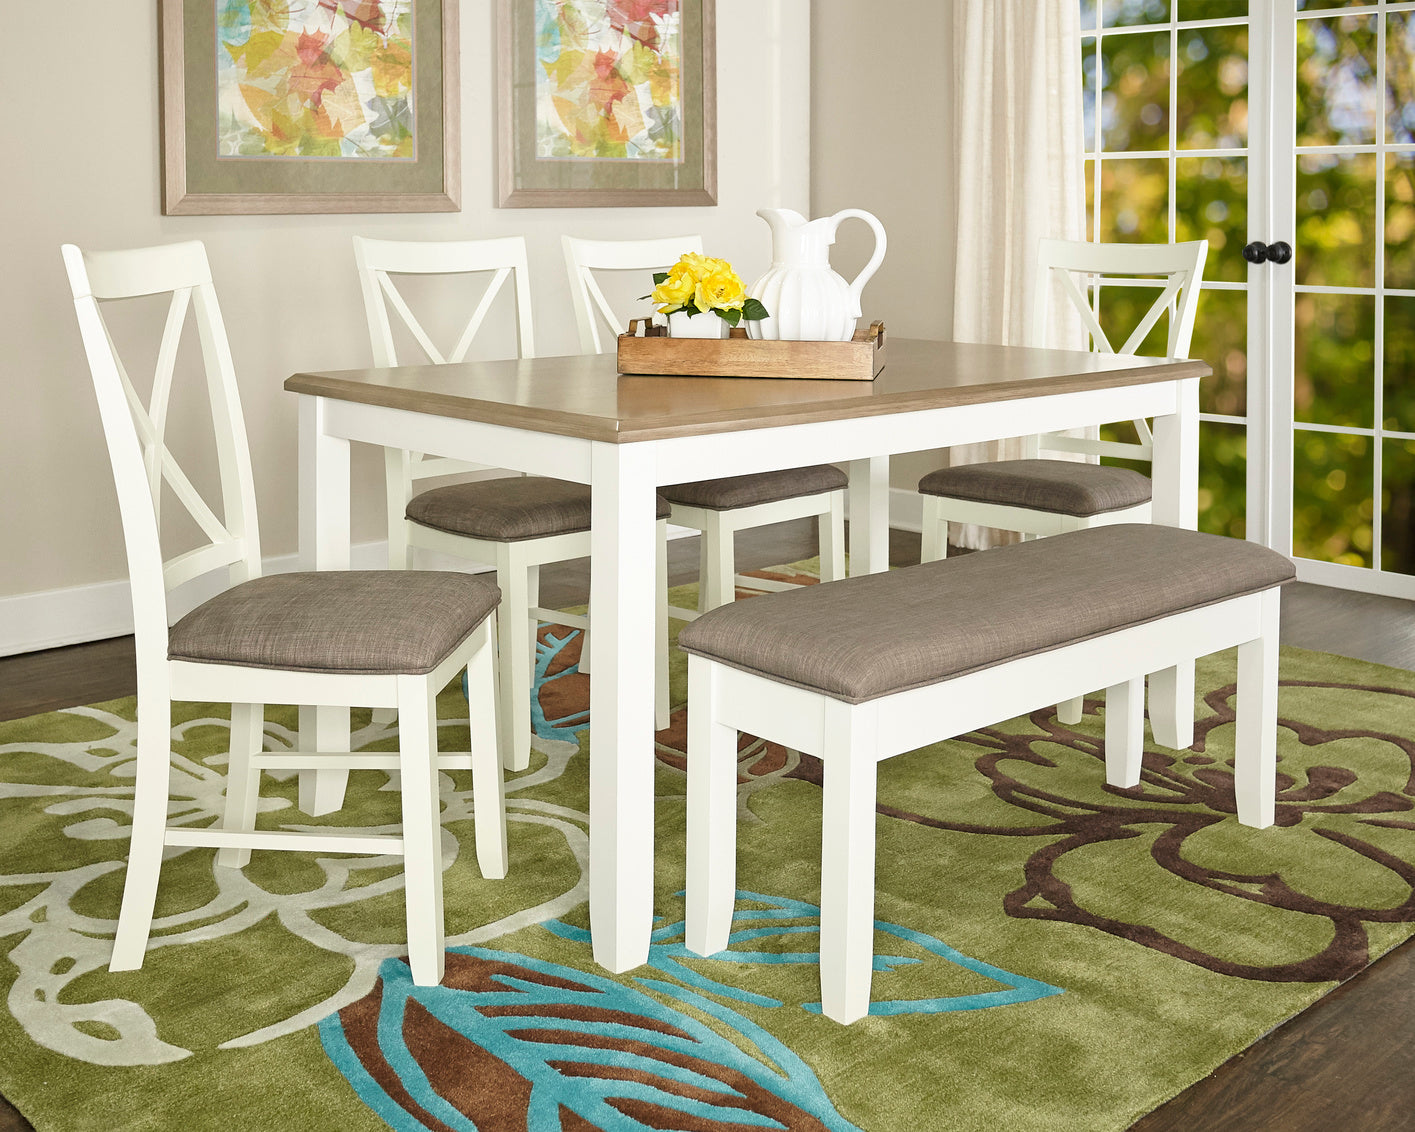 WEEKLY or MONTHLY. Jenny Taupe Table & 4 Chairs & Bench